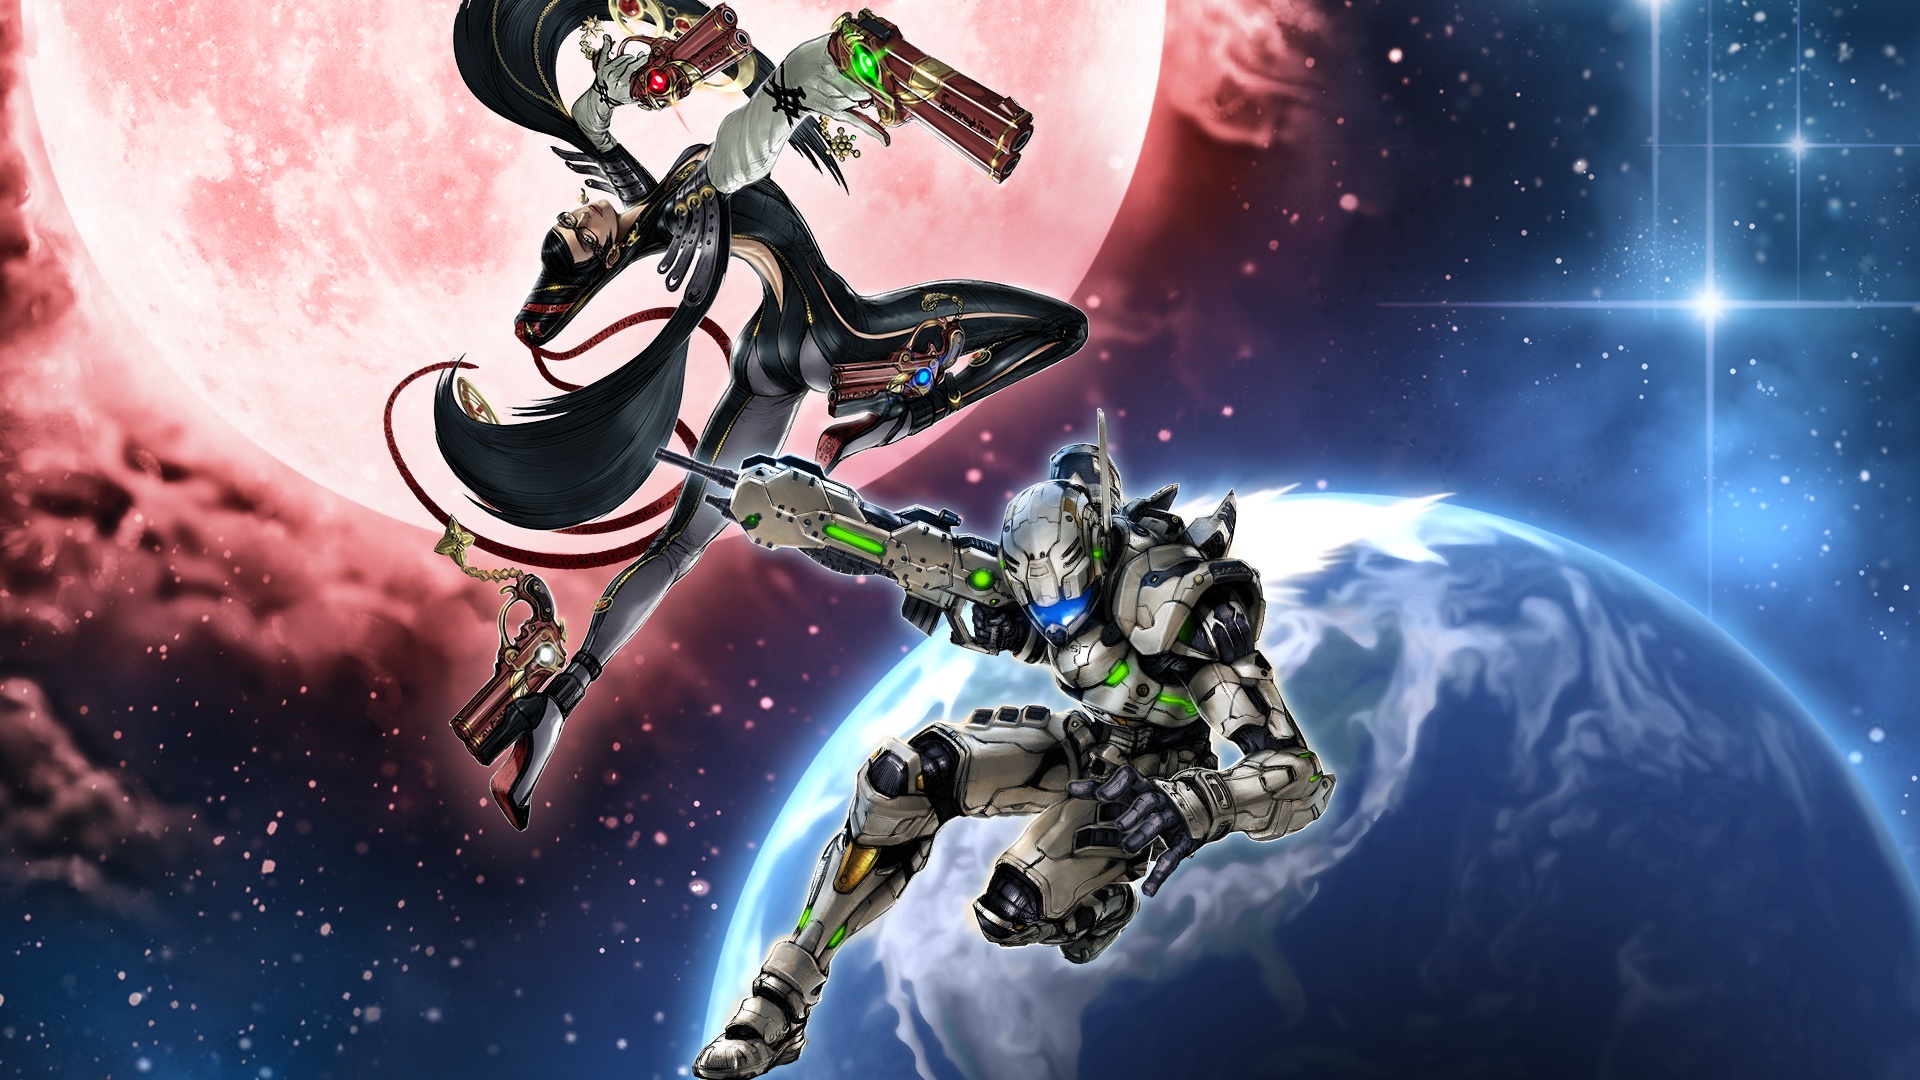 Video For Bayonetta & Vanquish 10th Anniversary Bundle is Now Available on Xbox One